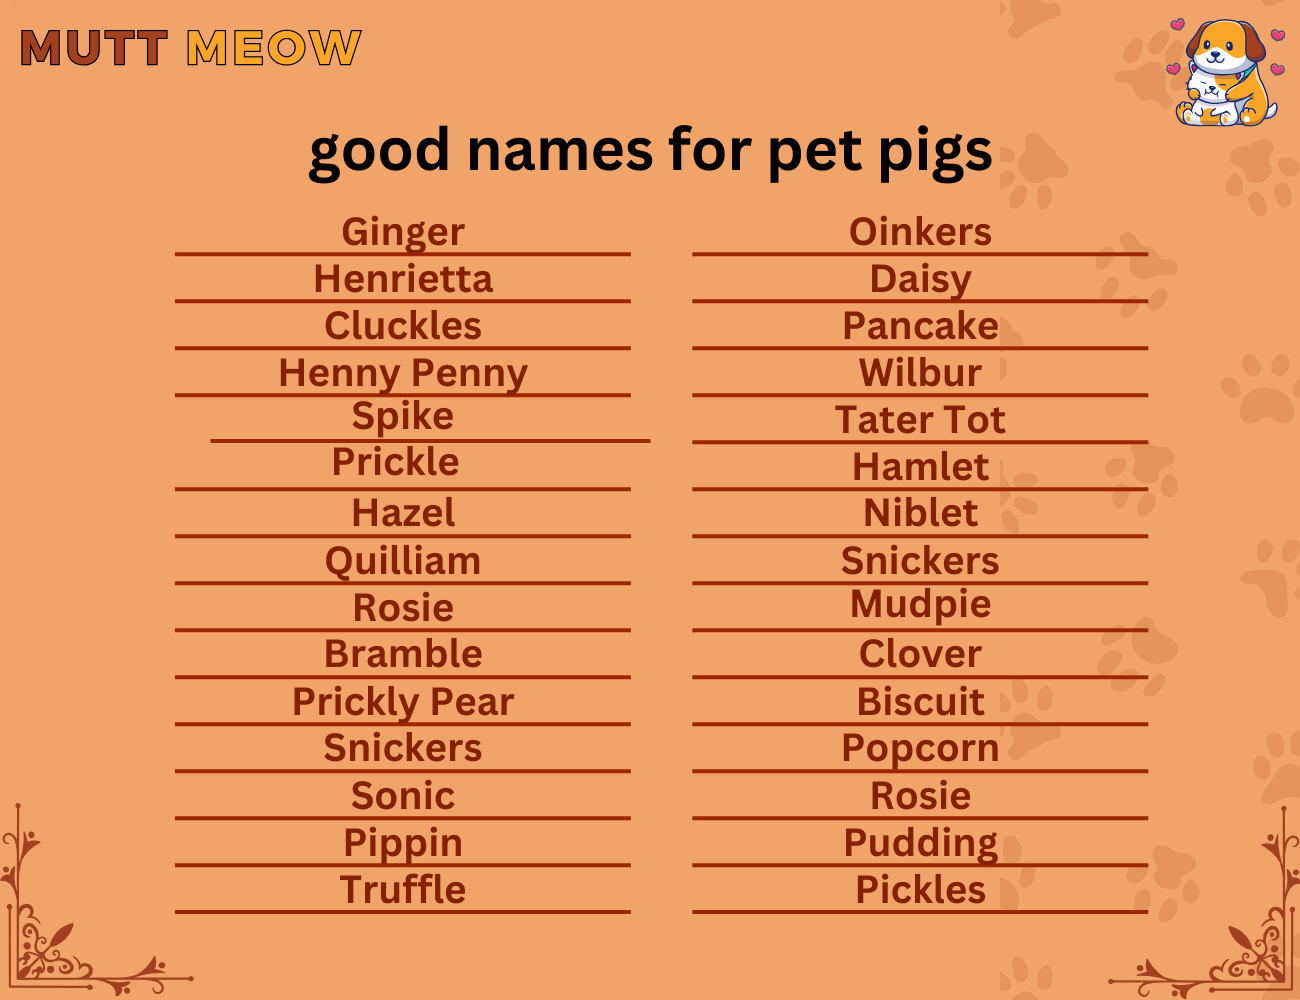 good names for pet pigs